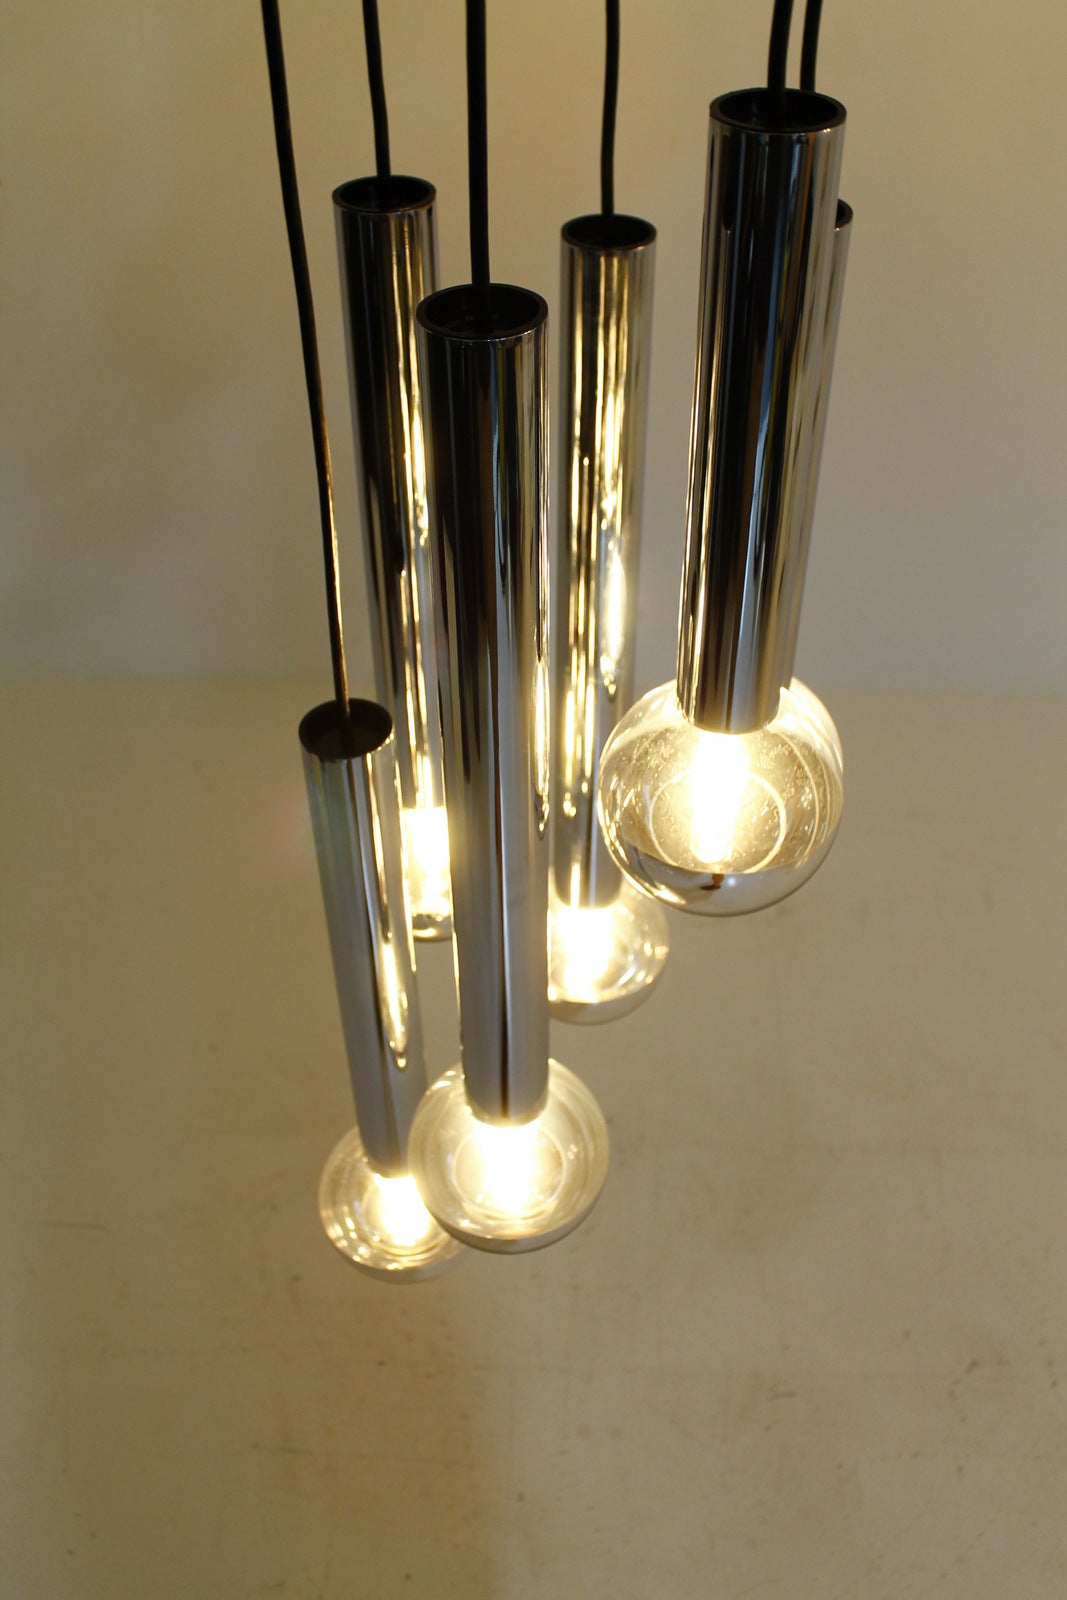 Chrome and Glass Cascade Chandelier by Motoko Ishii for Staff, 1970s For Sale 2